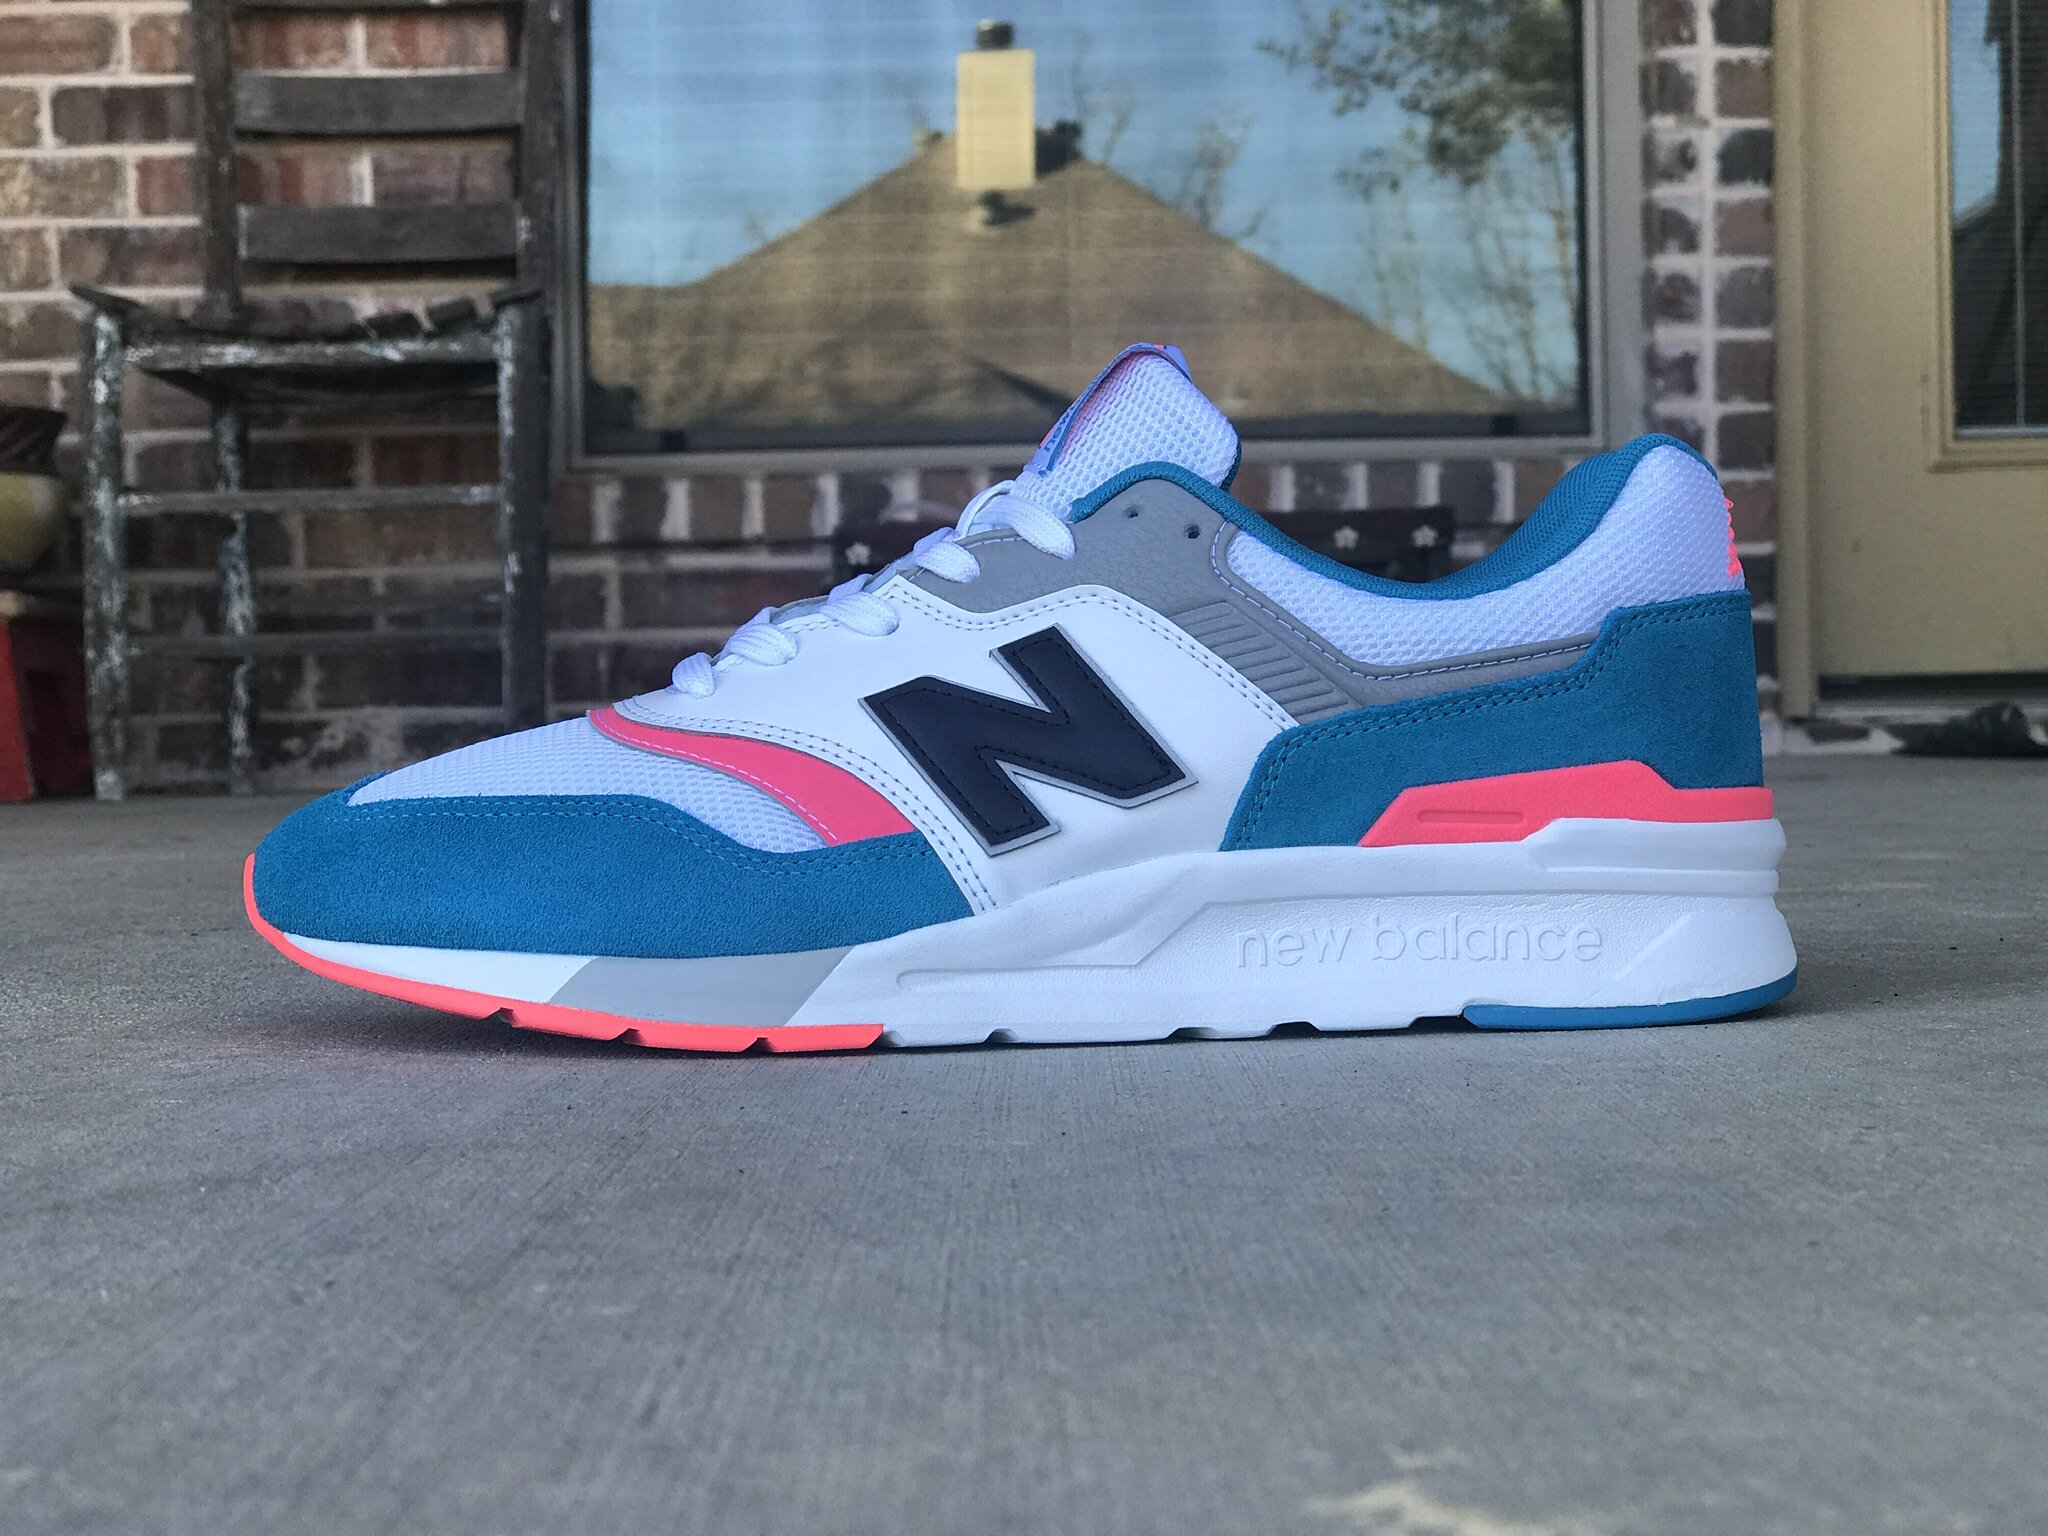 joe's new balance outlet store reviews